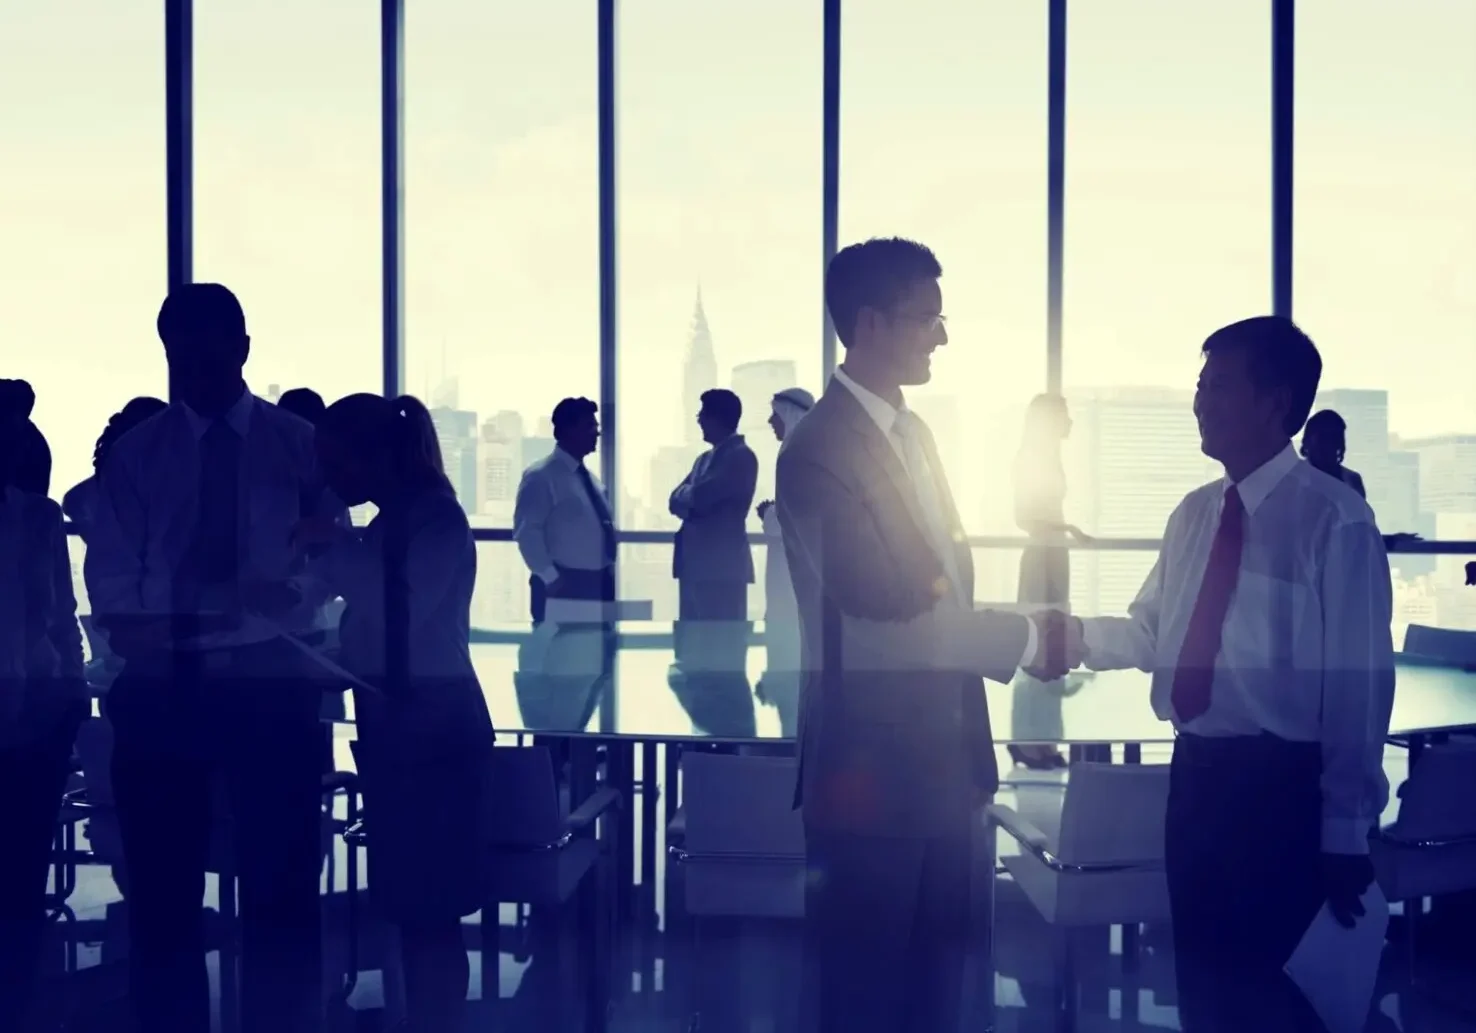 Silhouette of business men shaking hands in front of a table surrounded by other various business people talking in multiple groups with large windows spilling in light from the background